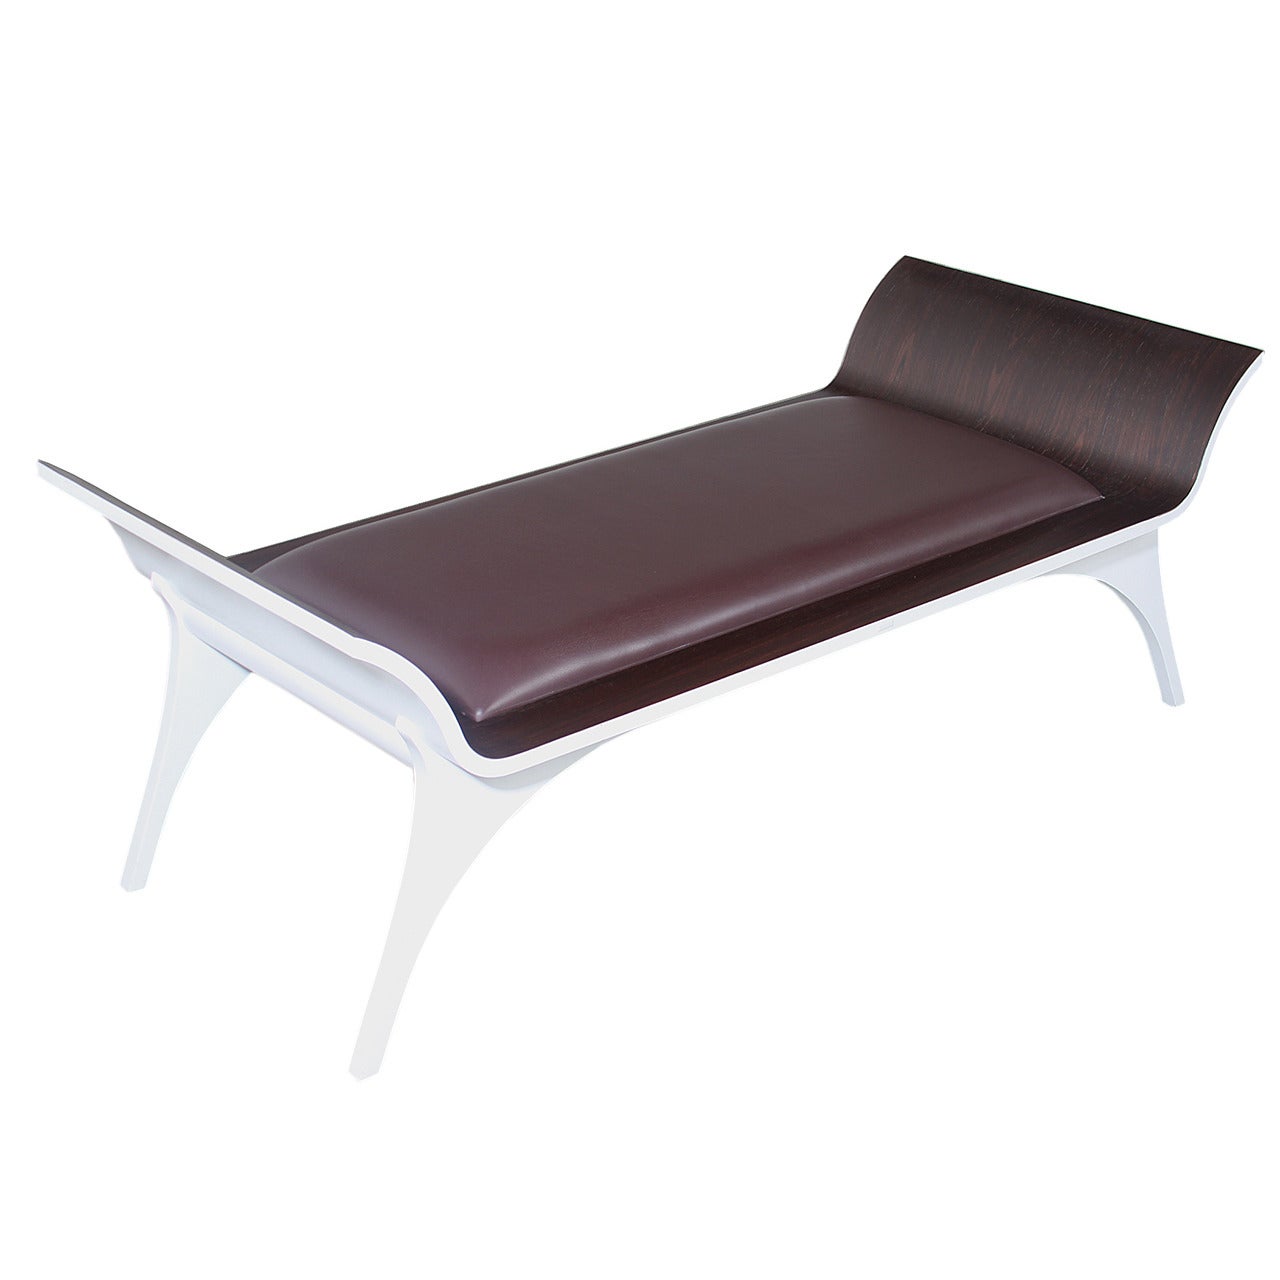 Midcentury Rosewood and Leather Bench, Jacqueline Terpins for Tepperman For Sale